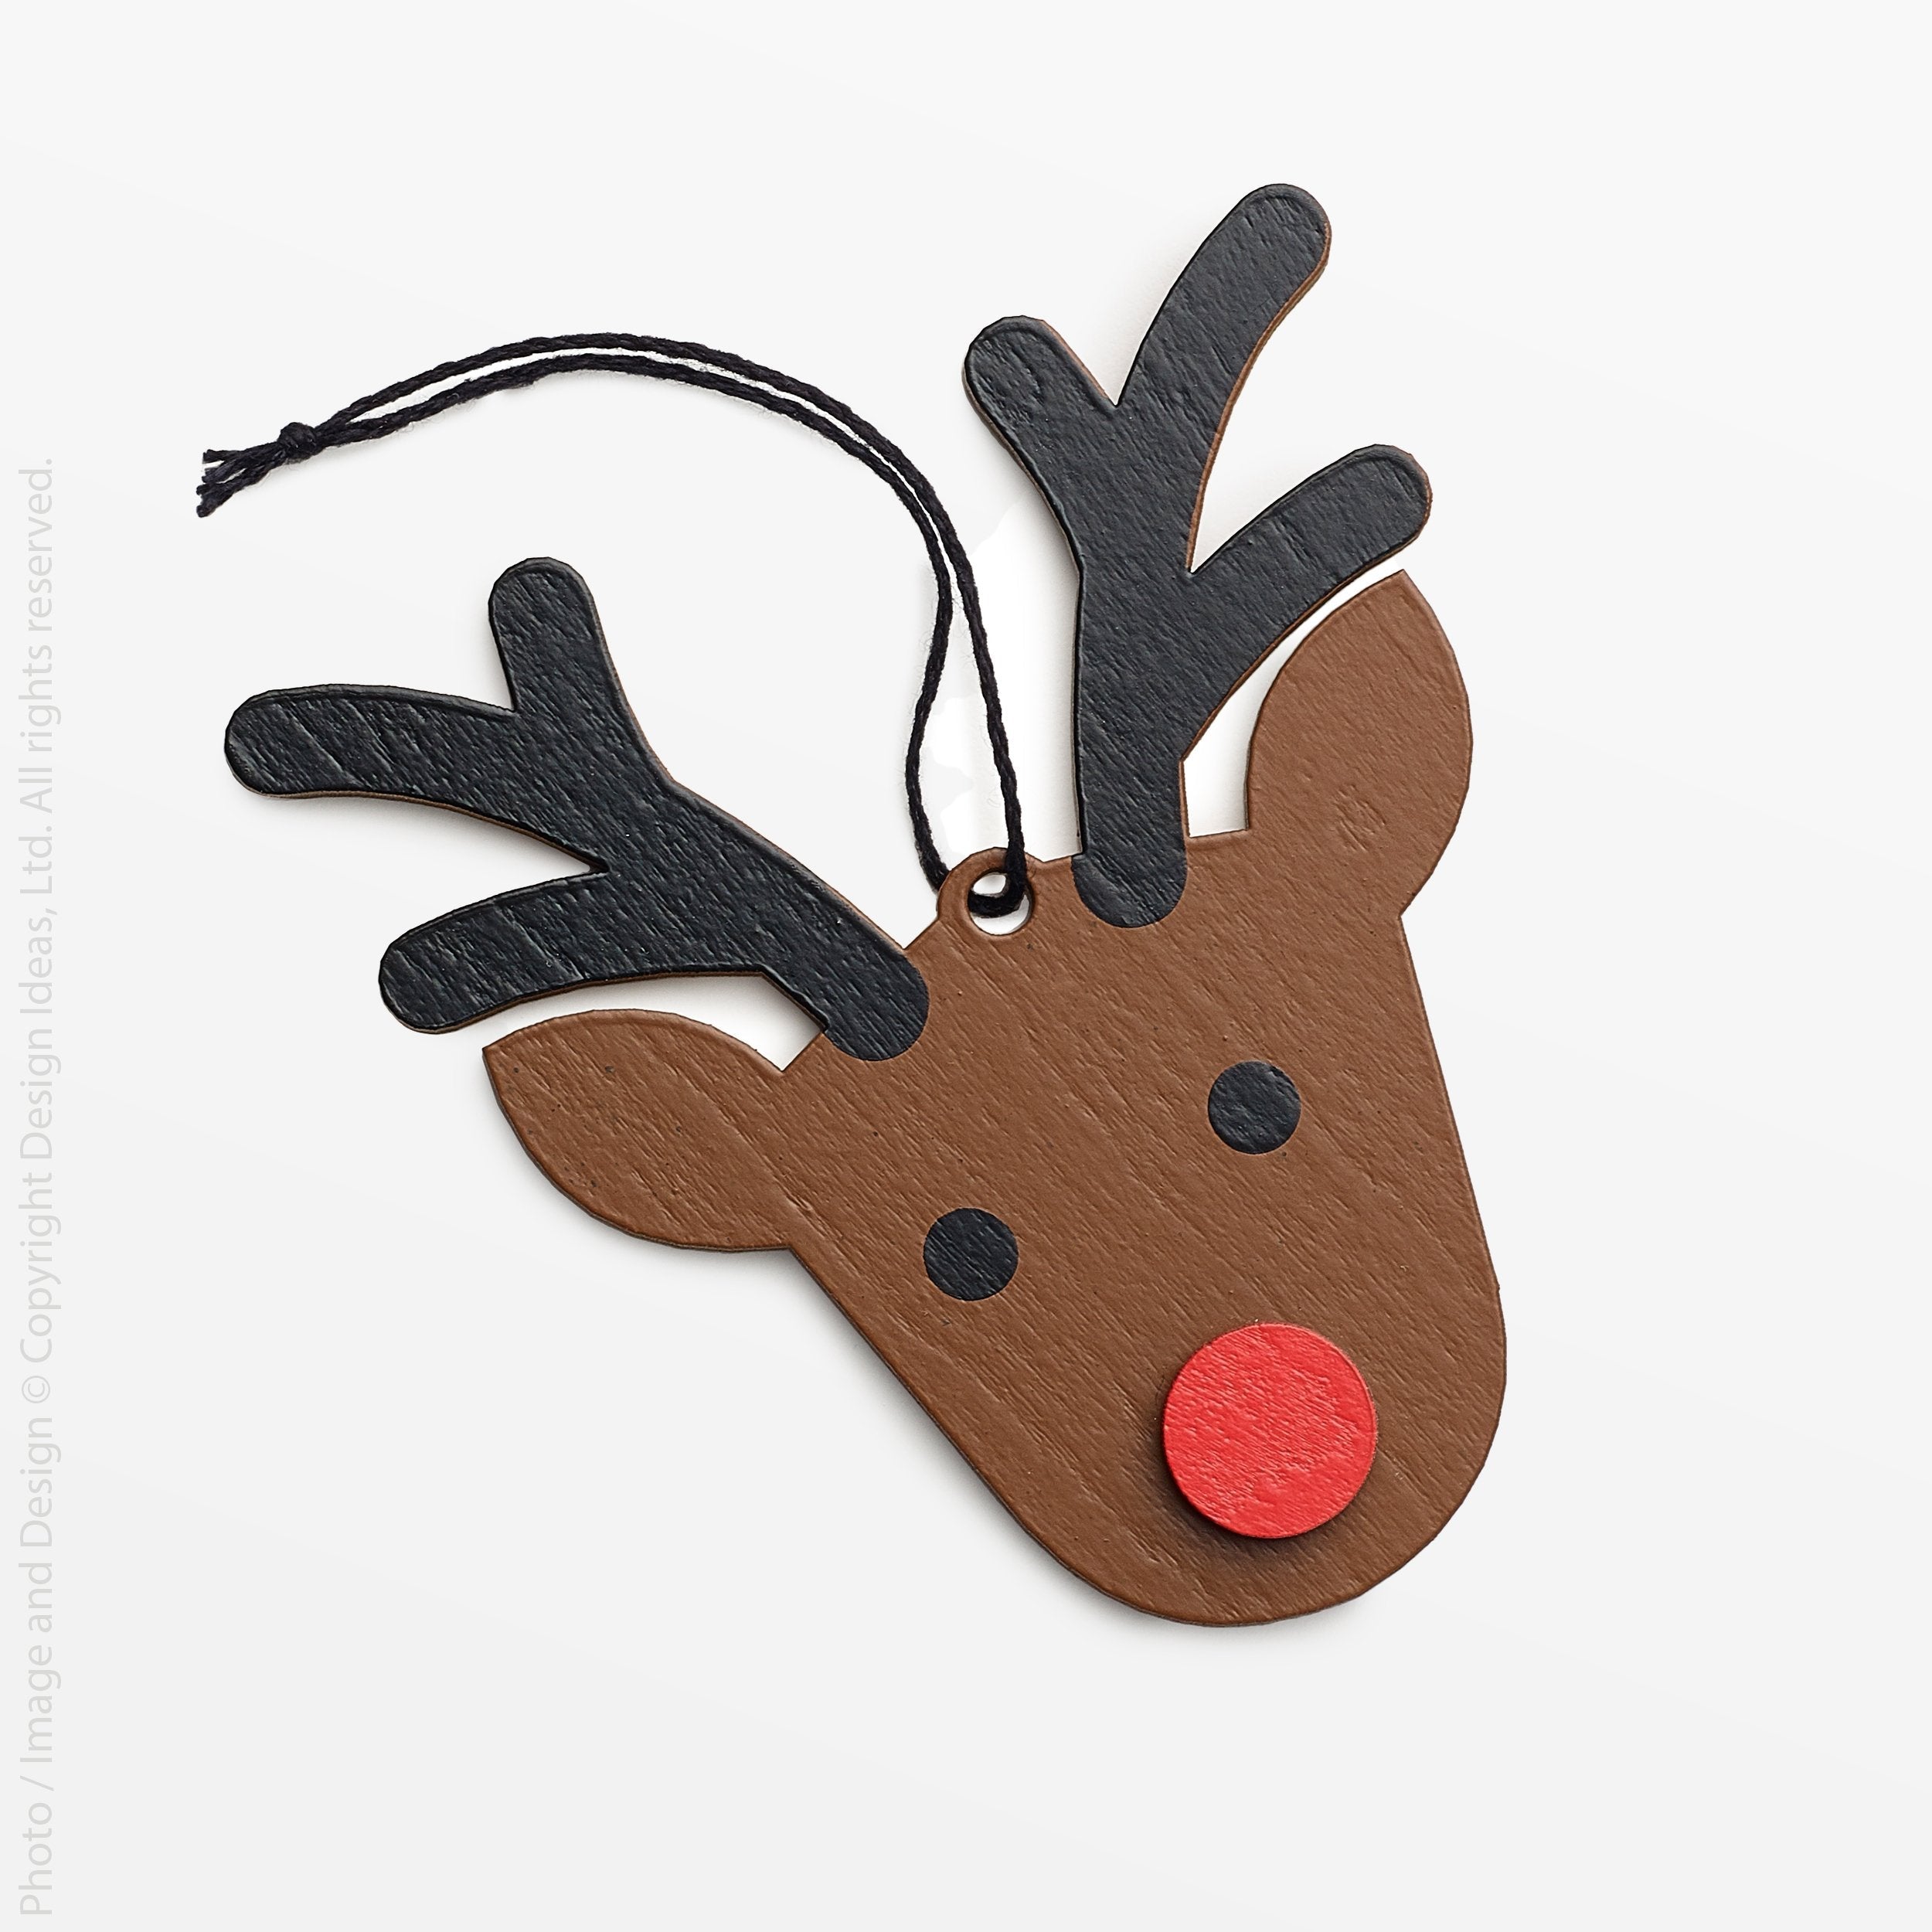 Hollyjolly Reindeer Wood Ornament - white color | Image 1 | From the HollyJolly Collection | Masterfully constructed with natural plywood for long lasting use | Available in white color | texxture home